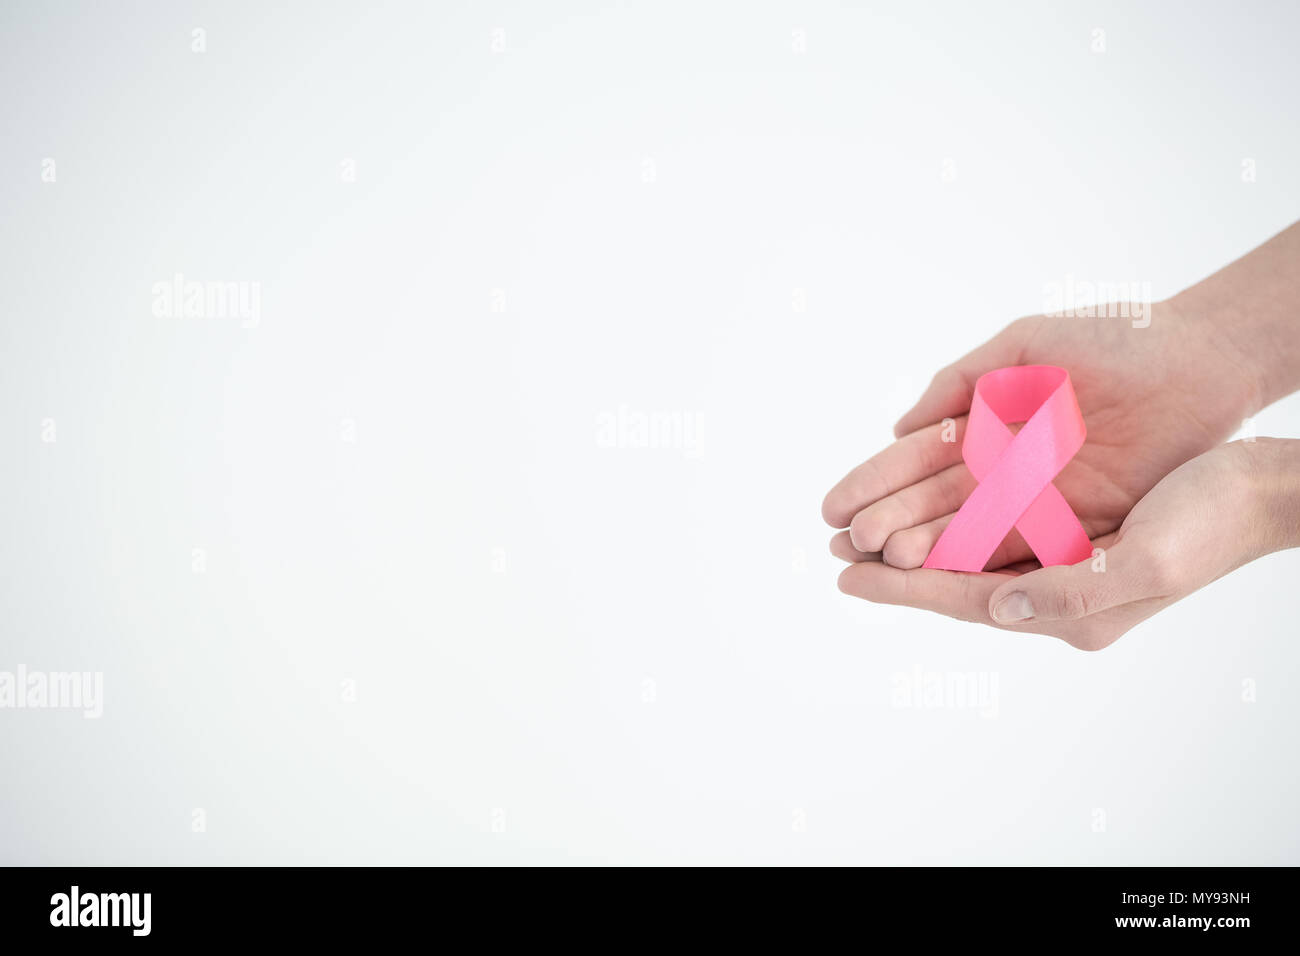 Hands holding pink ribbon on white background Stock Photo